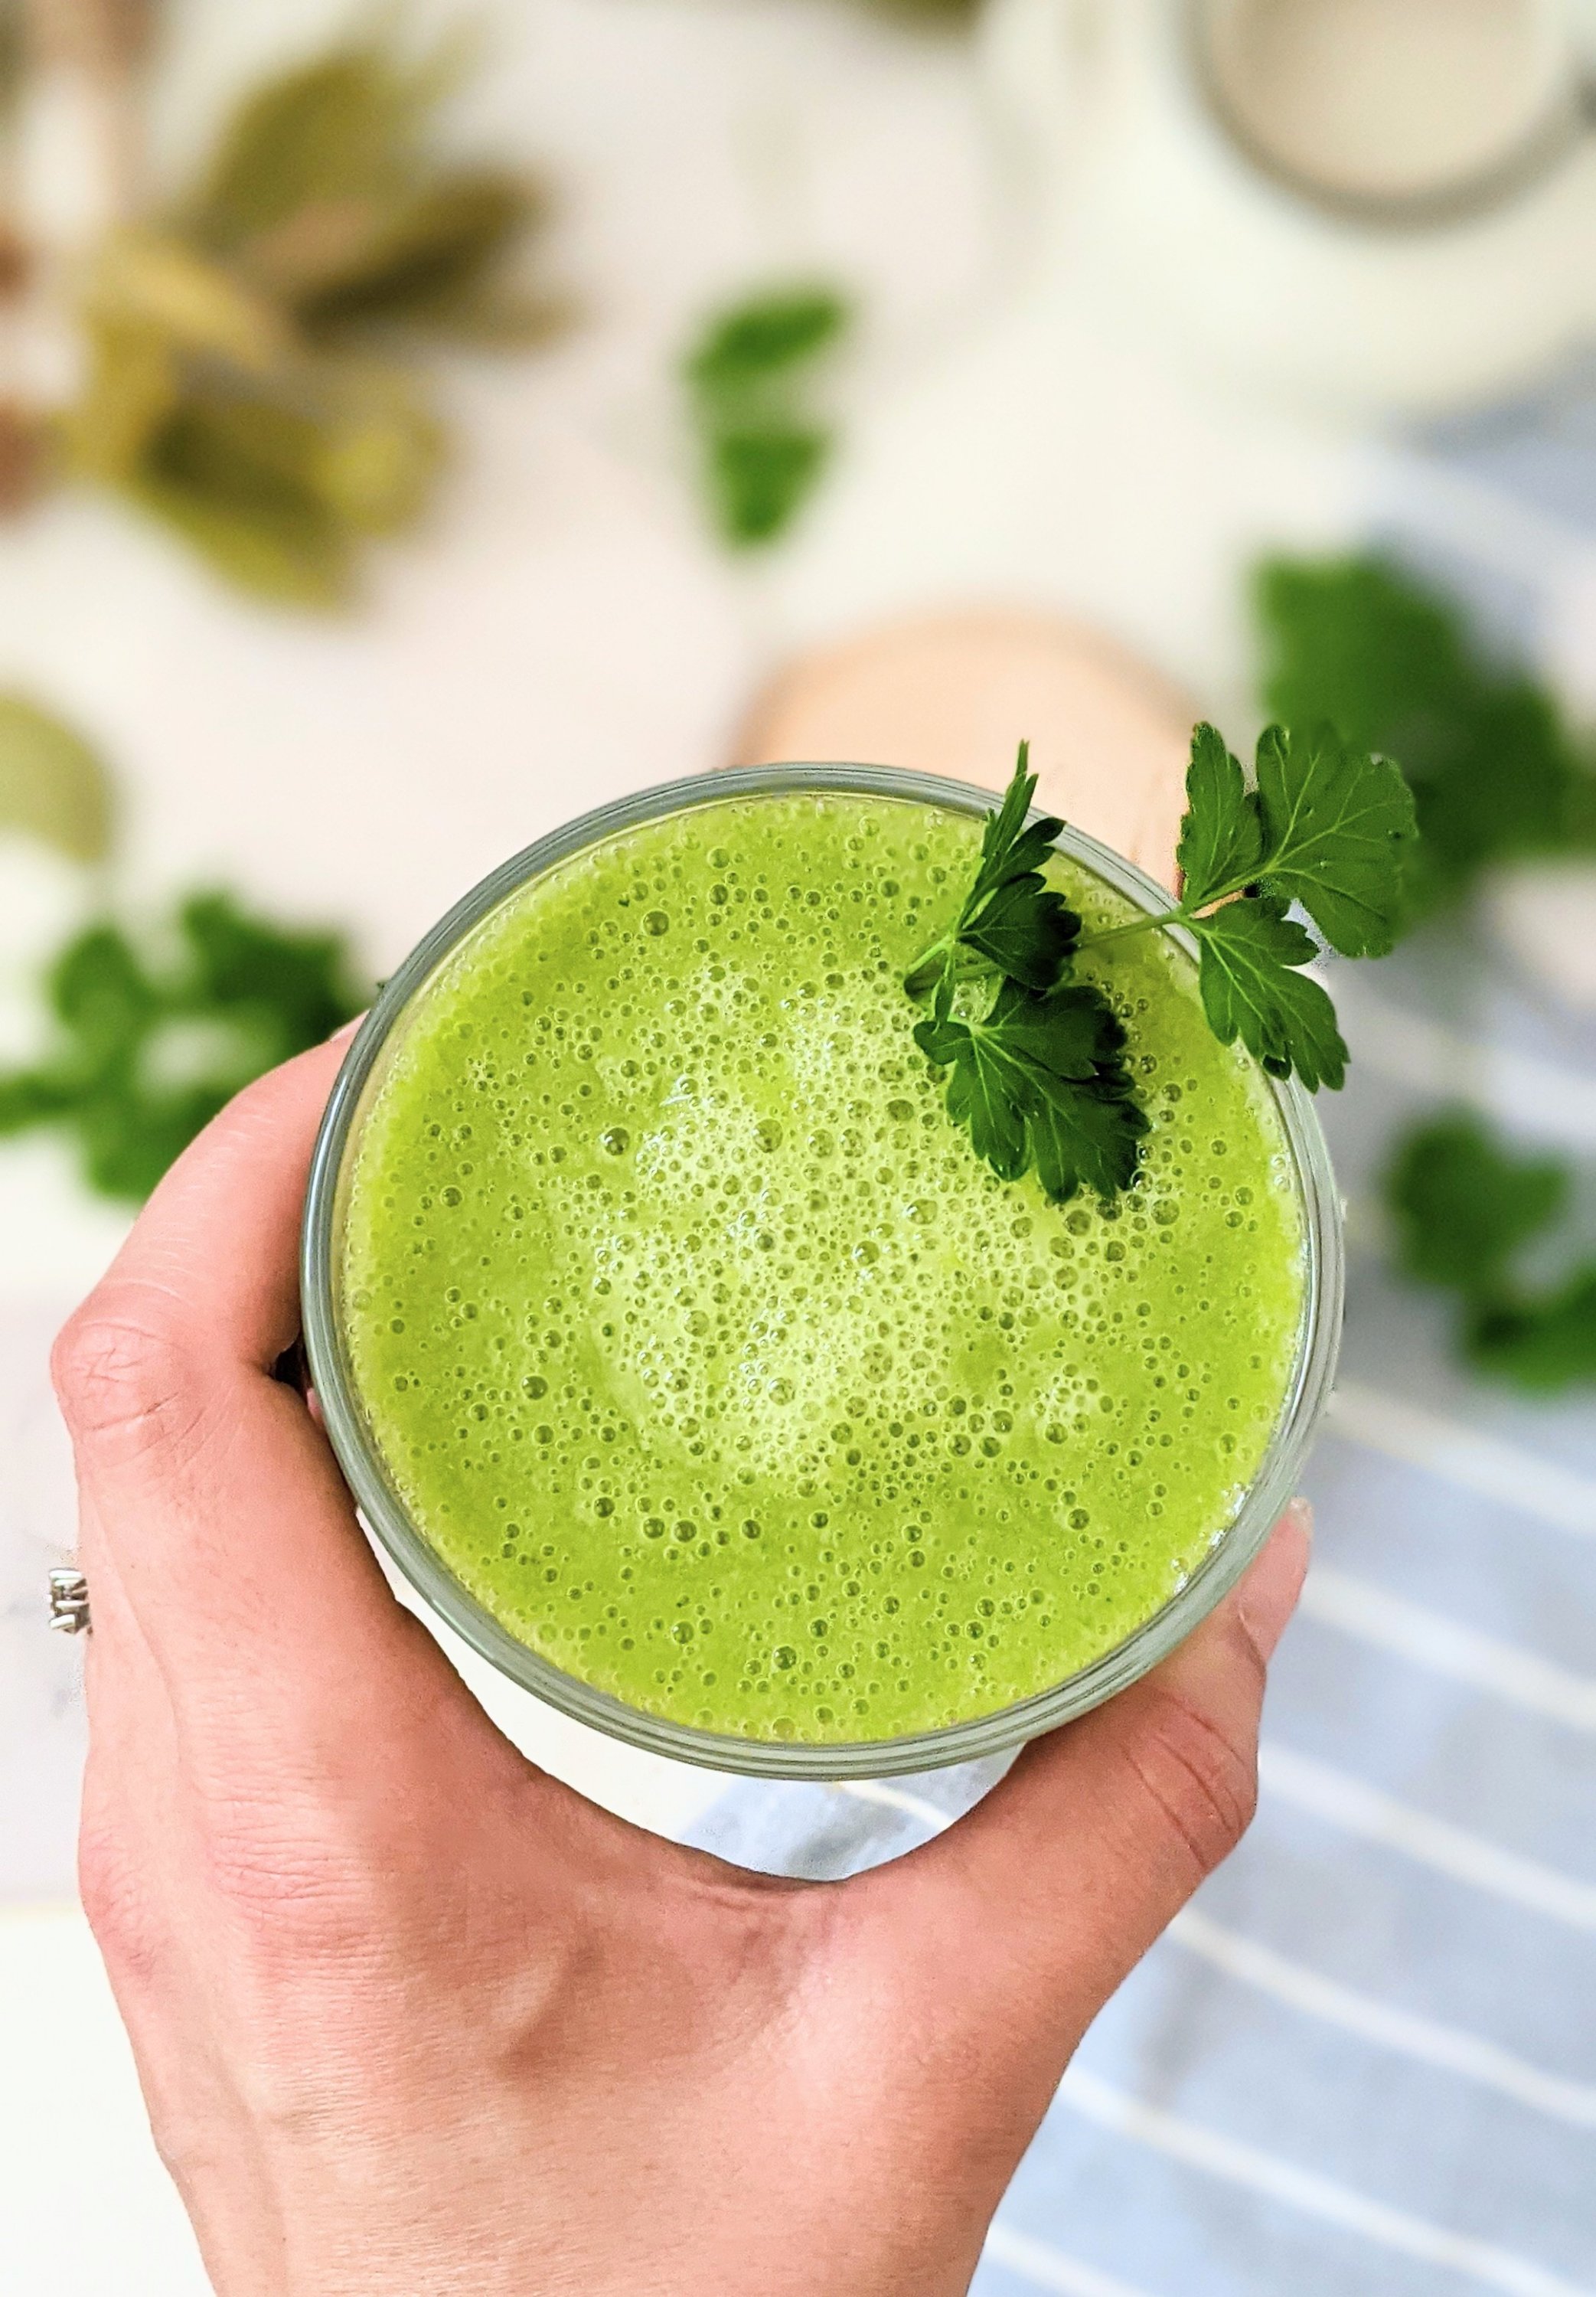 parsley smoothie benefits with orange gut healthy protein powder and frozen kale smoothies with frozen mangoes for breakfast with banana and chia seeds